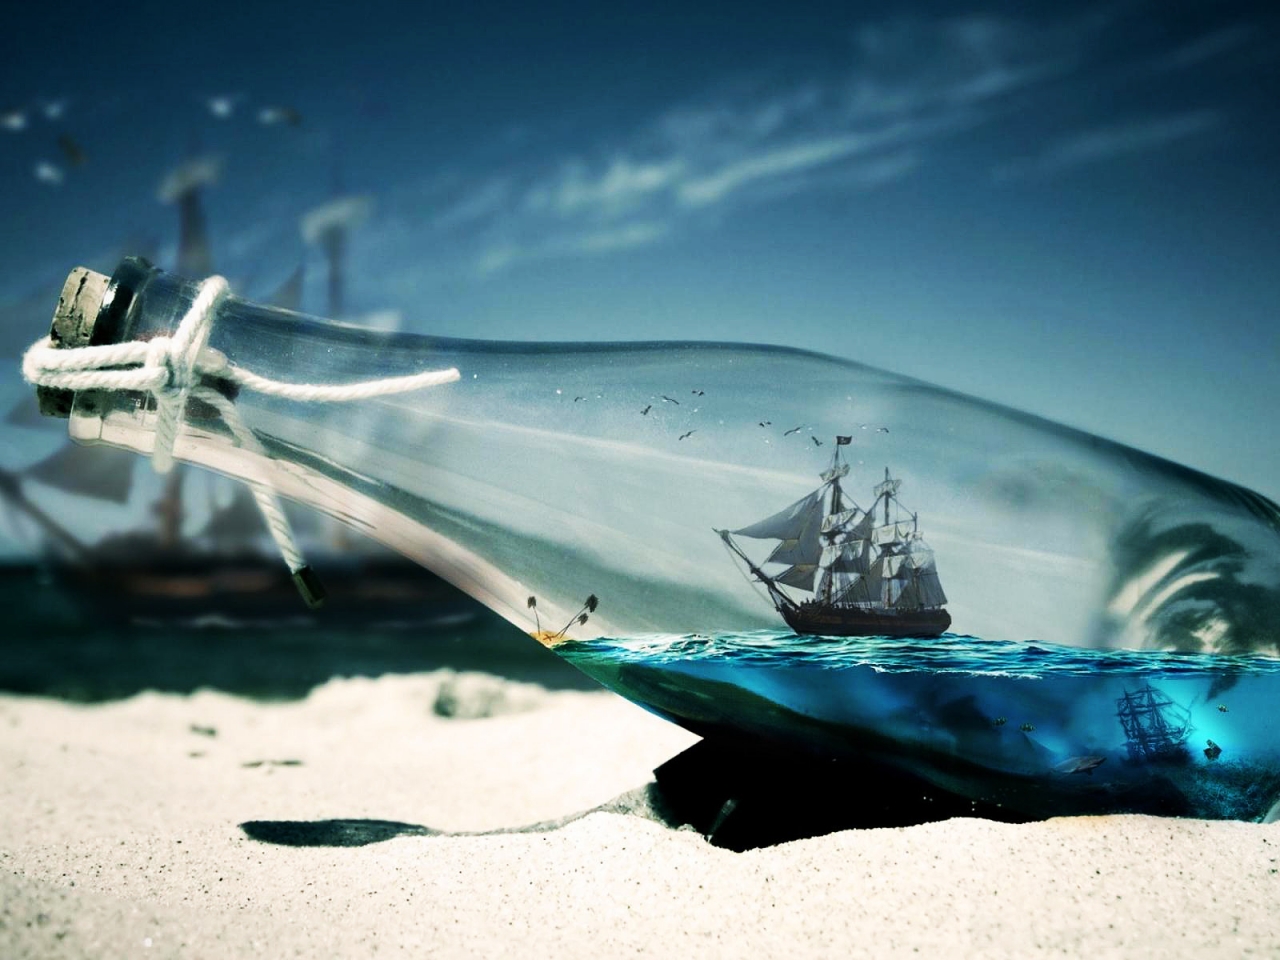 Sailing in a Bottle for 1280 x 960 resolution